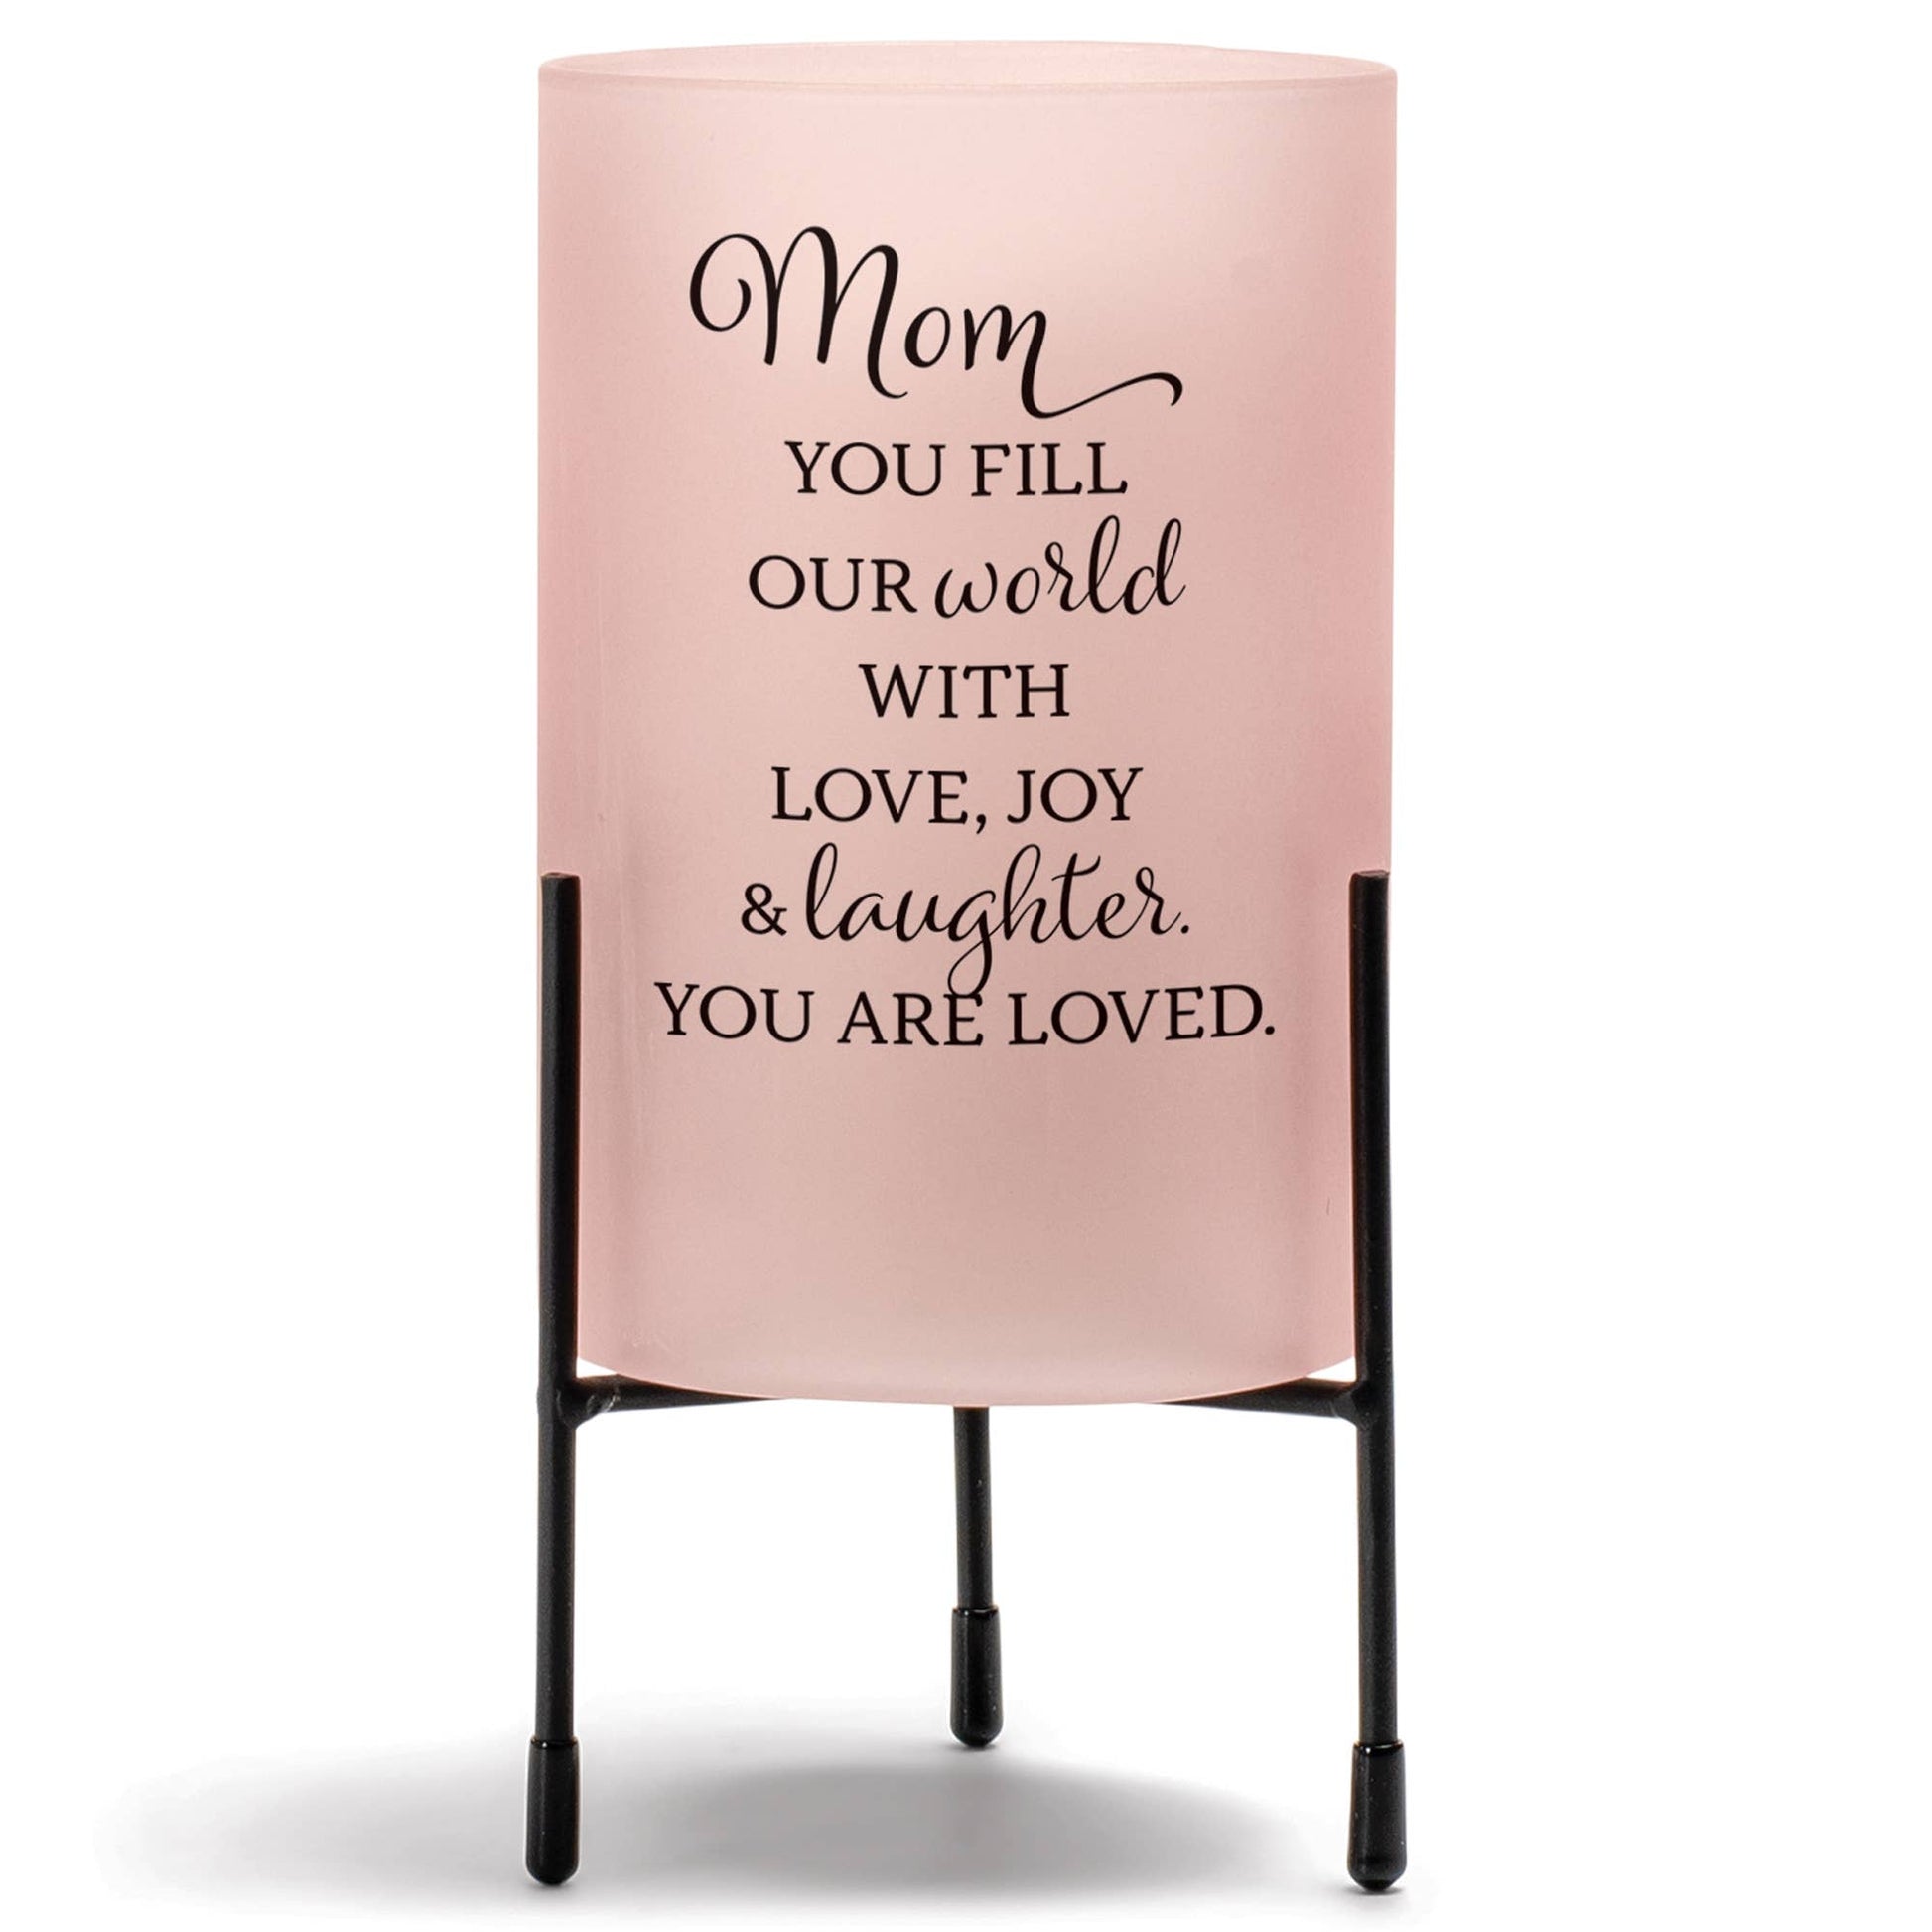 Mom Fill Our World With Love Glass Candleholder With Stand | 2FruitBearers